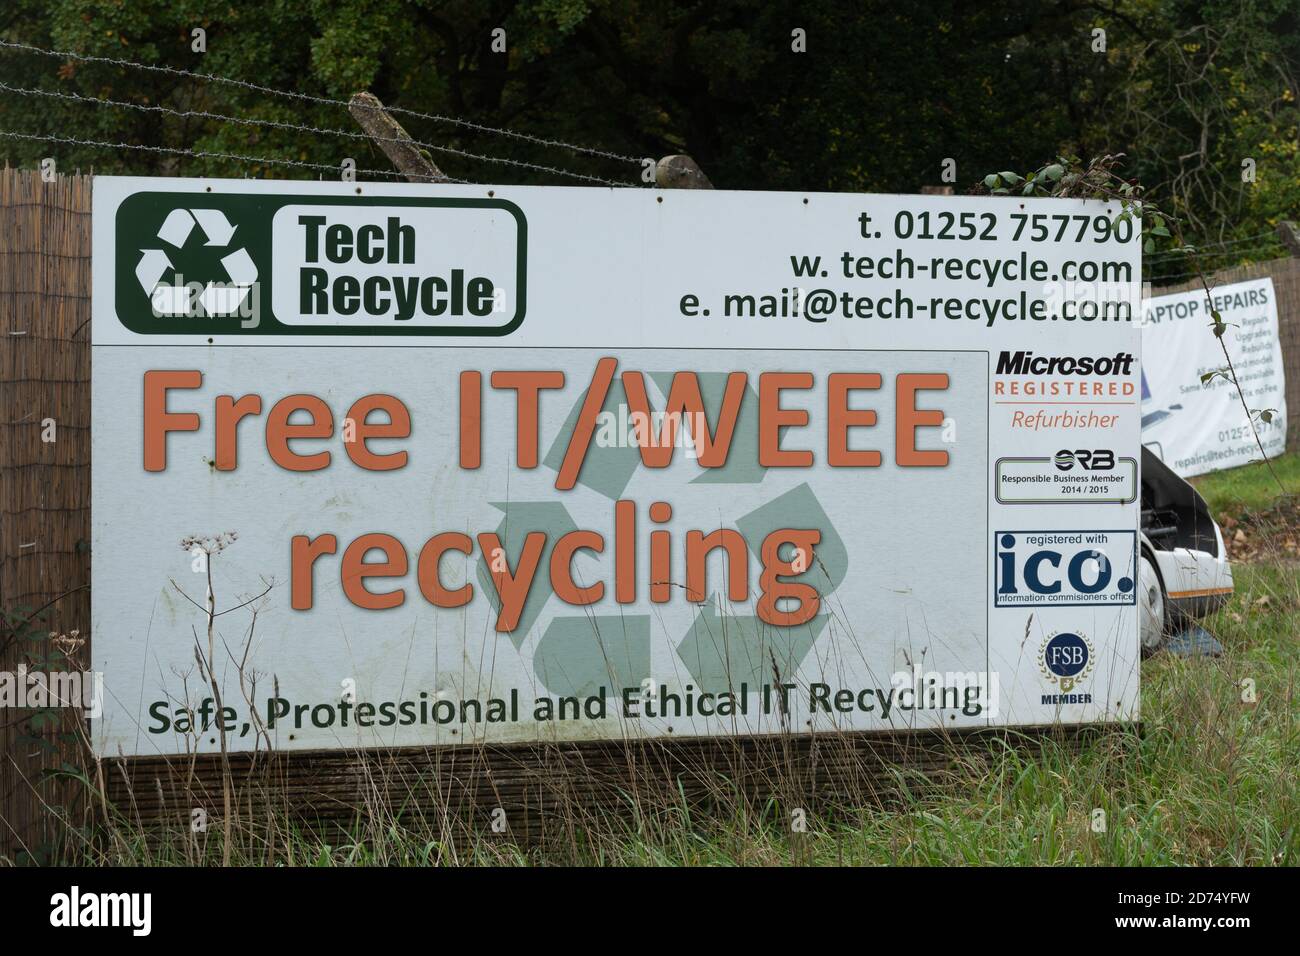 Tech Recycle sign, company providing free IT and WEEE recycling, UK Stock Photo